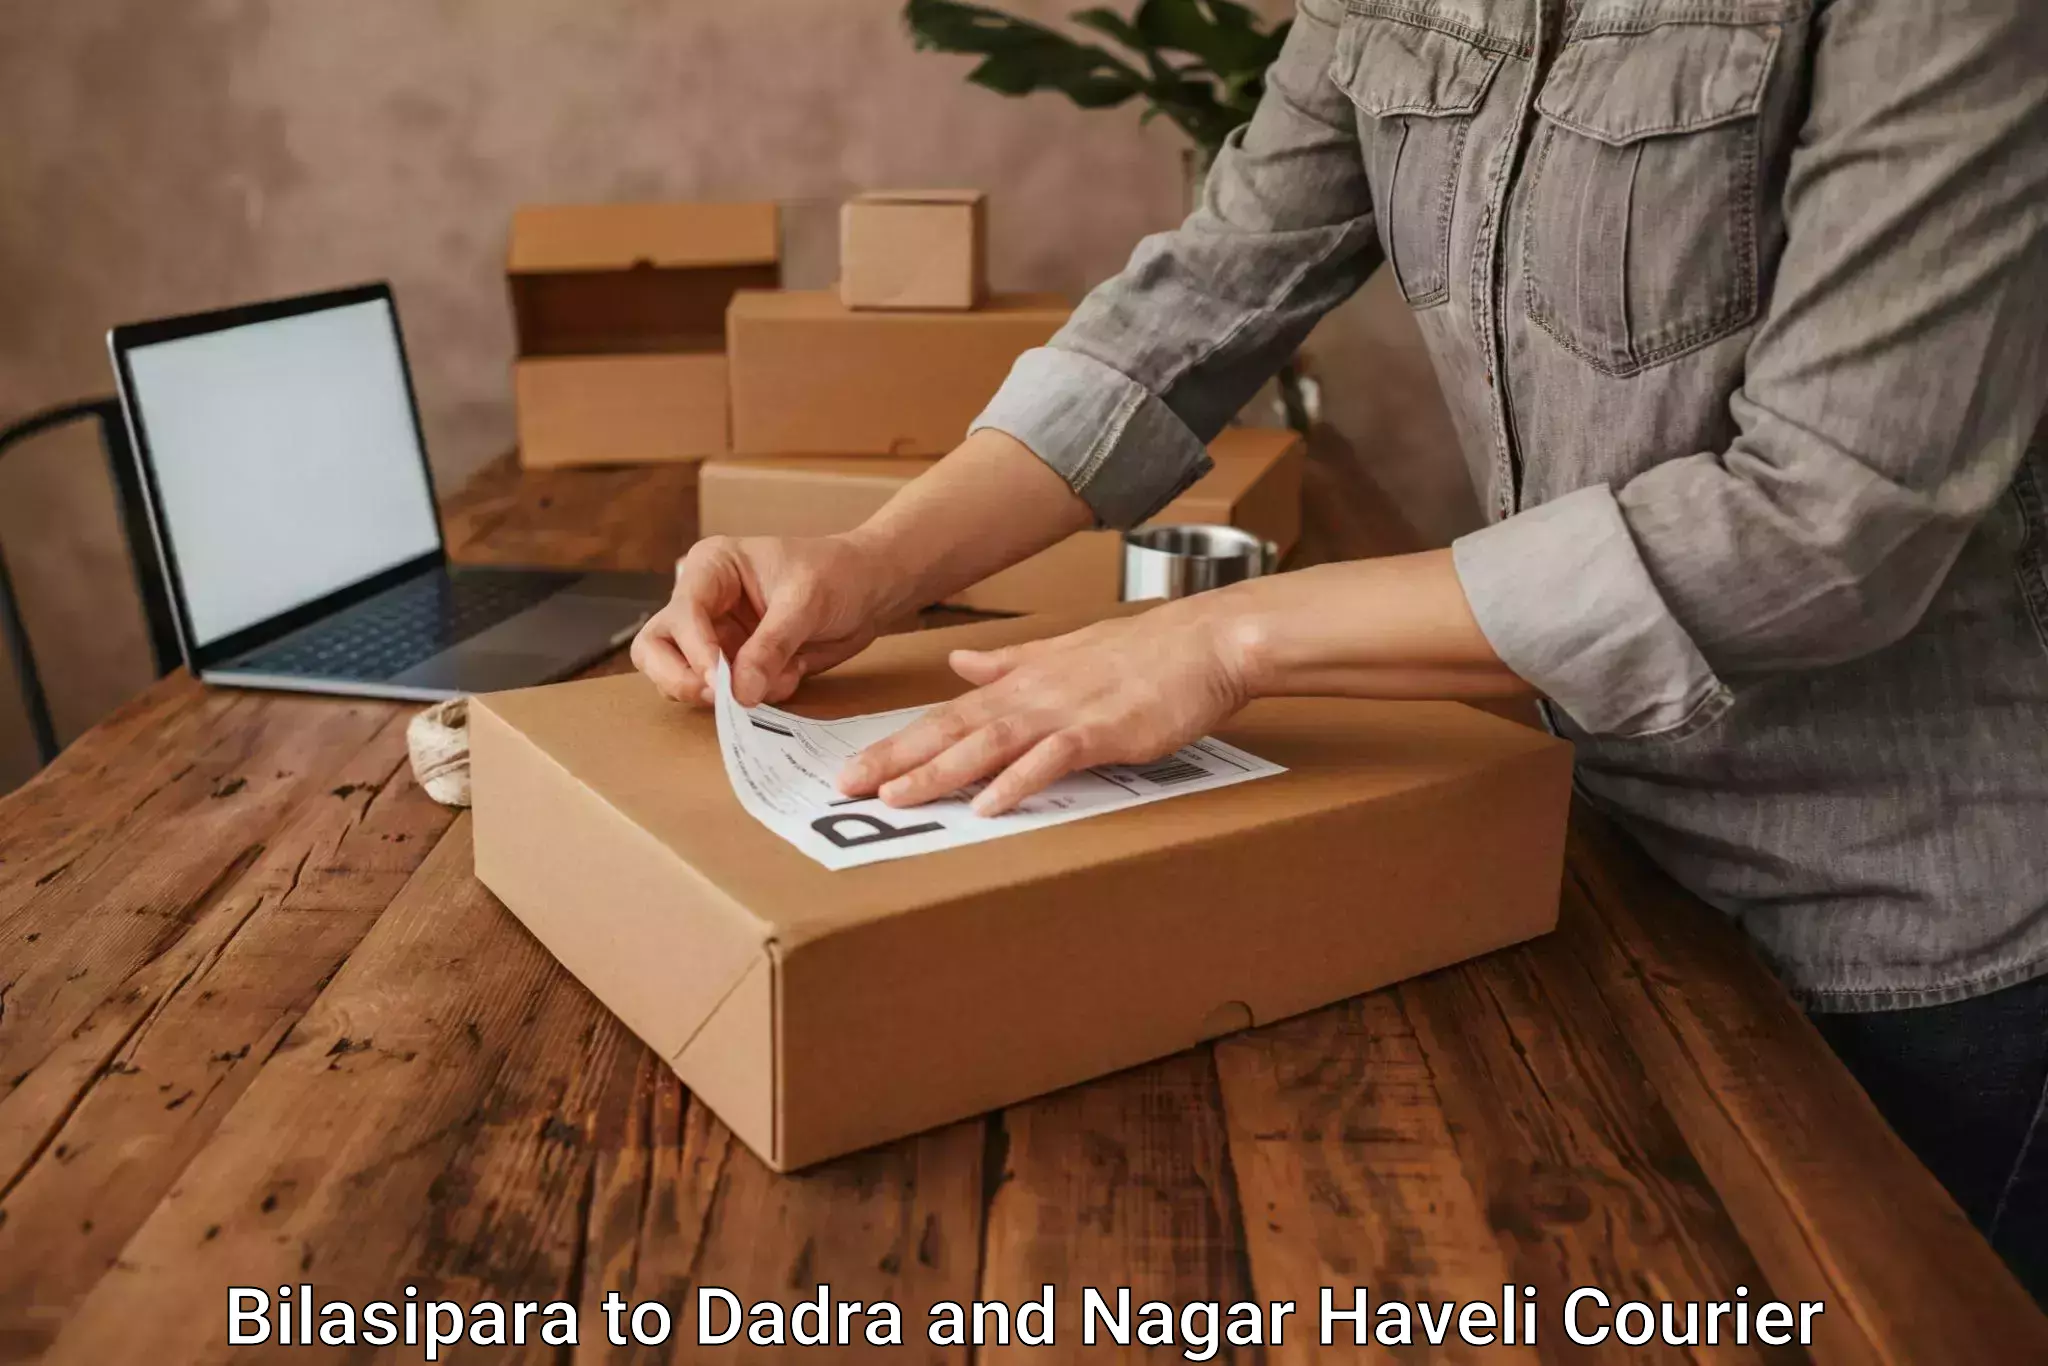 Reliable delivery network Bilasipara to Dadra and Nagar Haveli